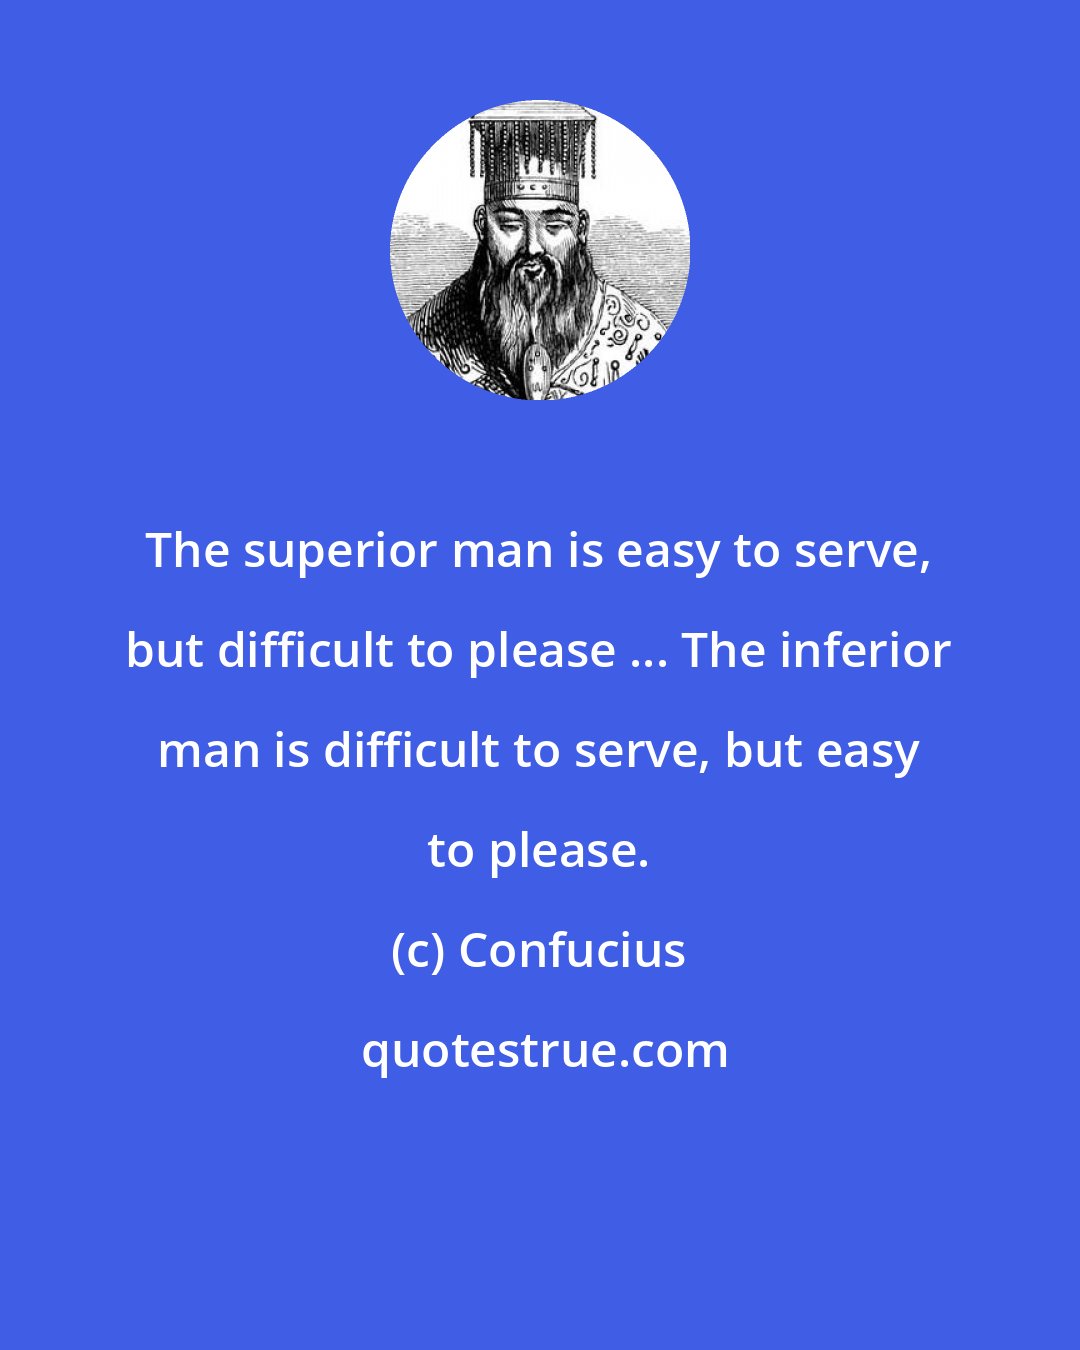 Confucius: The superior man is easy to serve, but difficult to please ... The inferior man is difficult to serve, but easy to please.